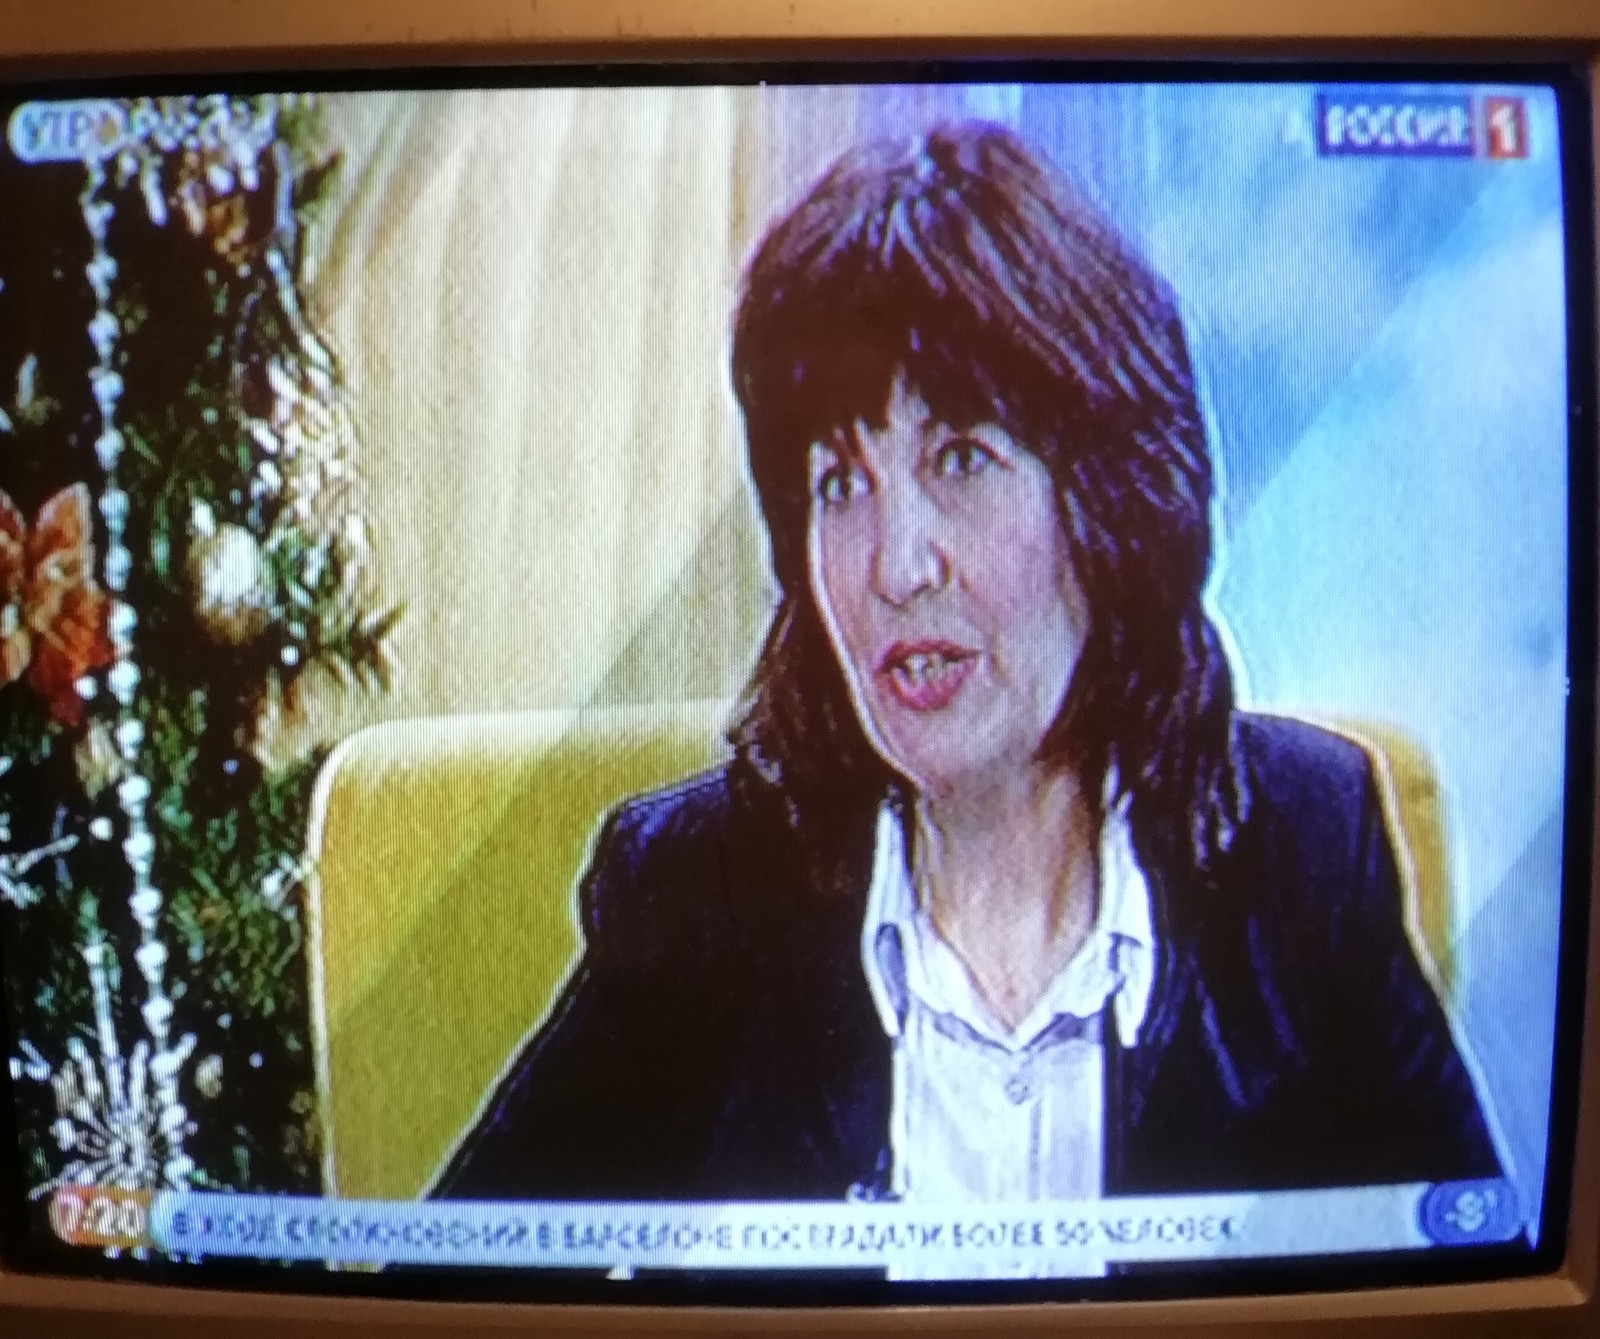 Homeopathy on the federal channel - My, The television, Homeopathy, Channel Russia 1, Obscurantism, Treatment, Reptilians, Mat